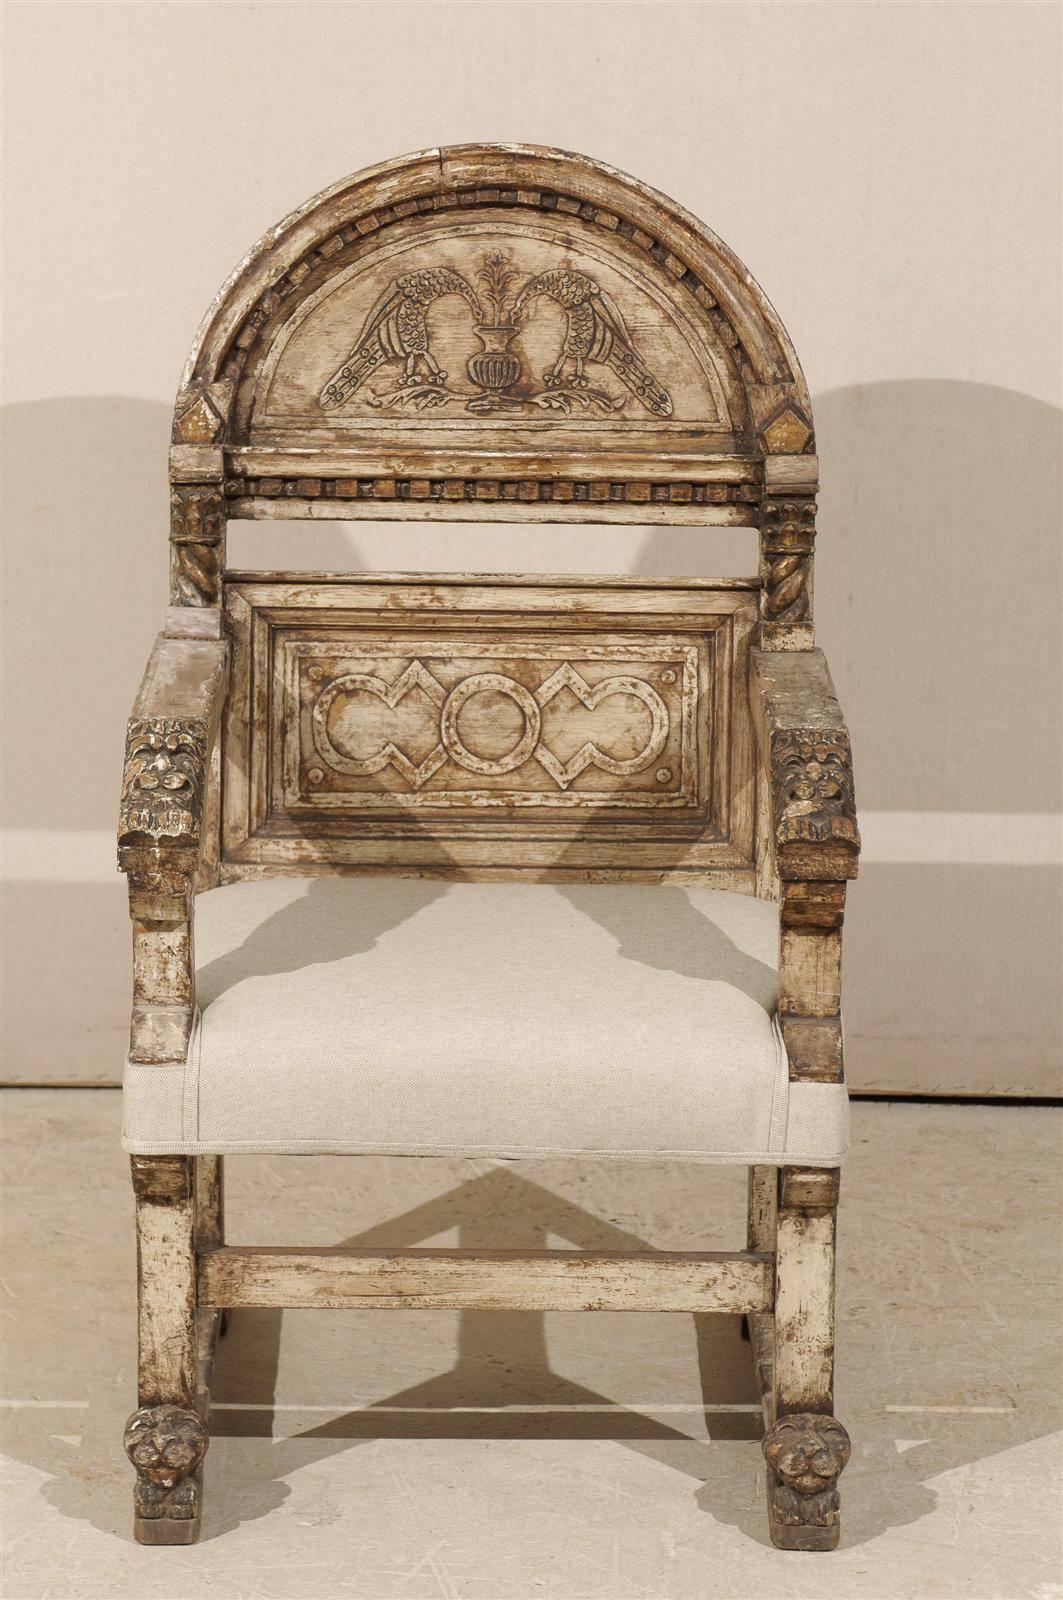 A Stately Italian Richly-Carved Wooden Chair with Elegant Aging, Early 19th C.  5